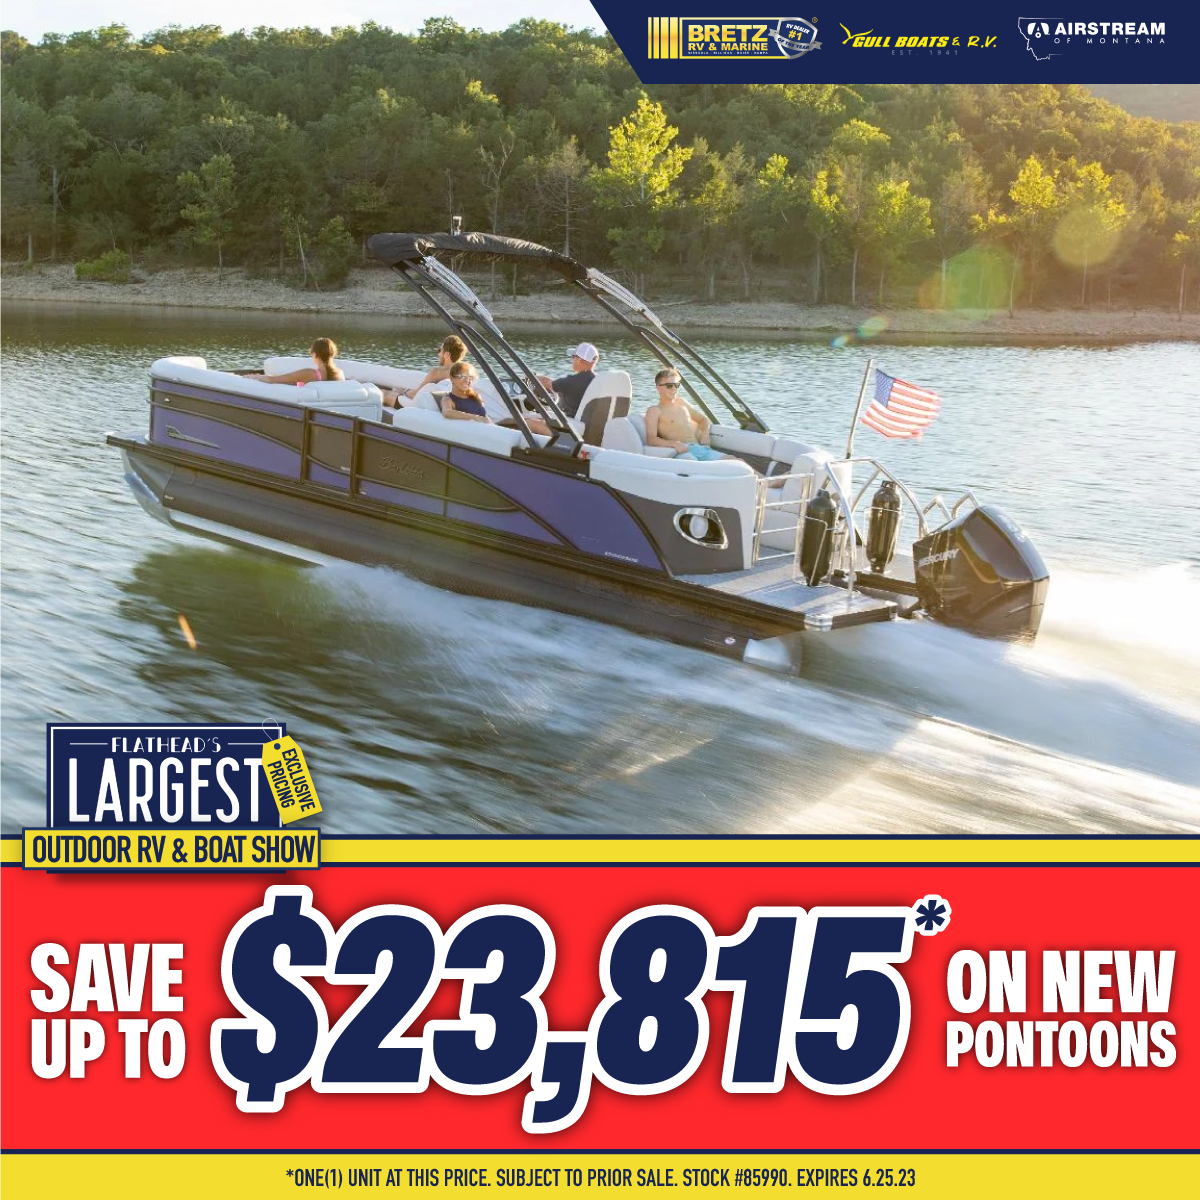 Save up to $23,815* on new pontoon boats